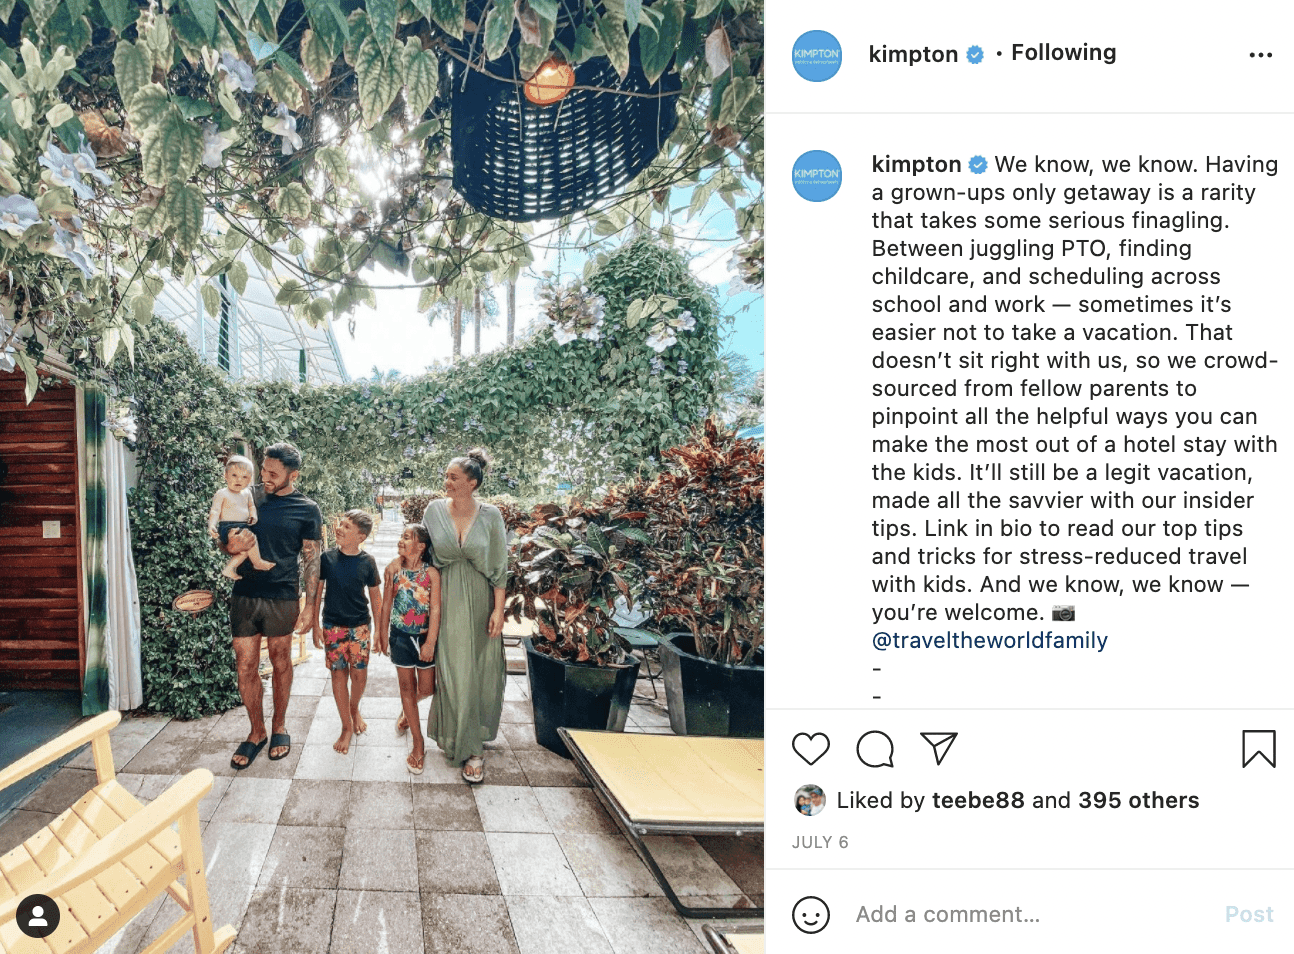 Kimpton re-shares influencer content on its social media profiles, combining company messaging with authentic consumer experiences.